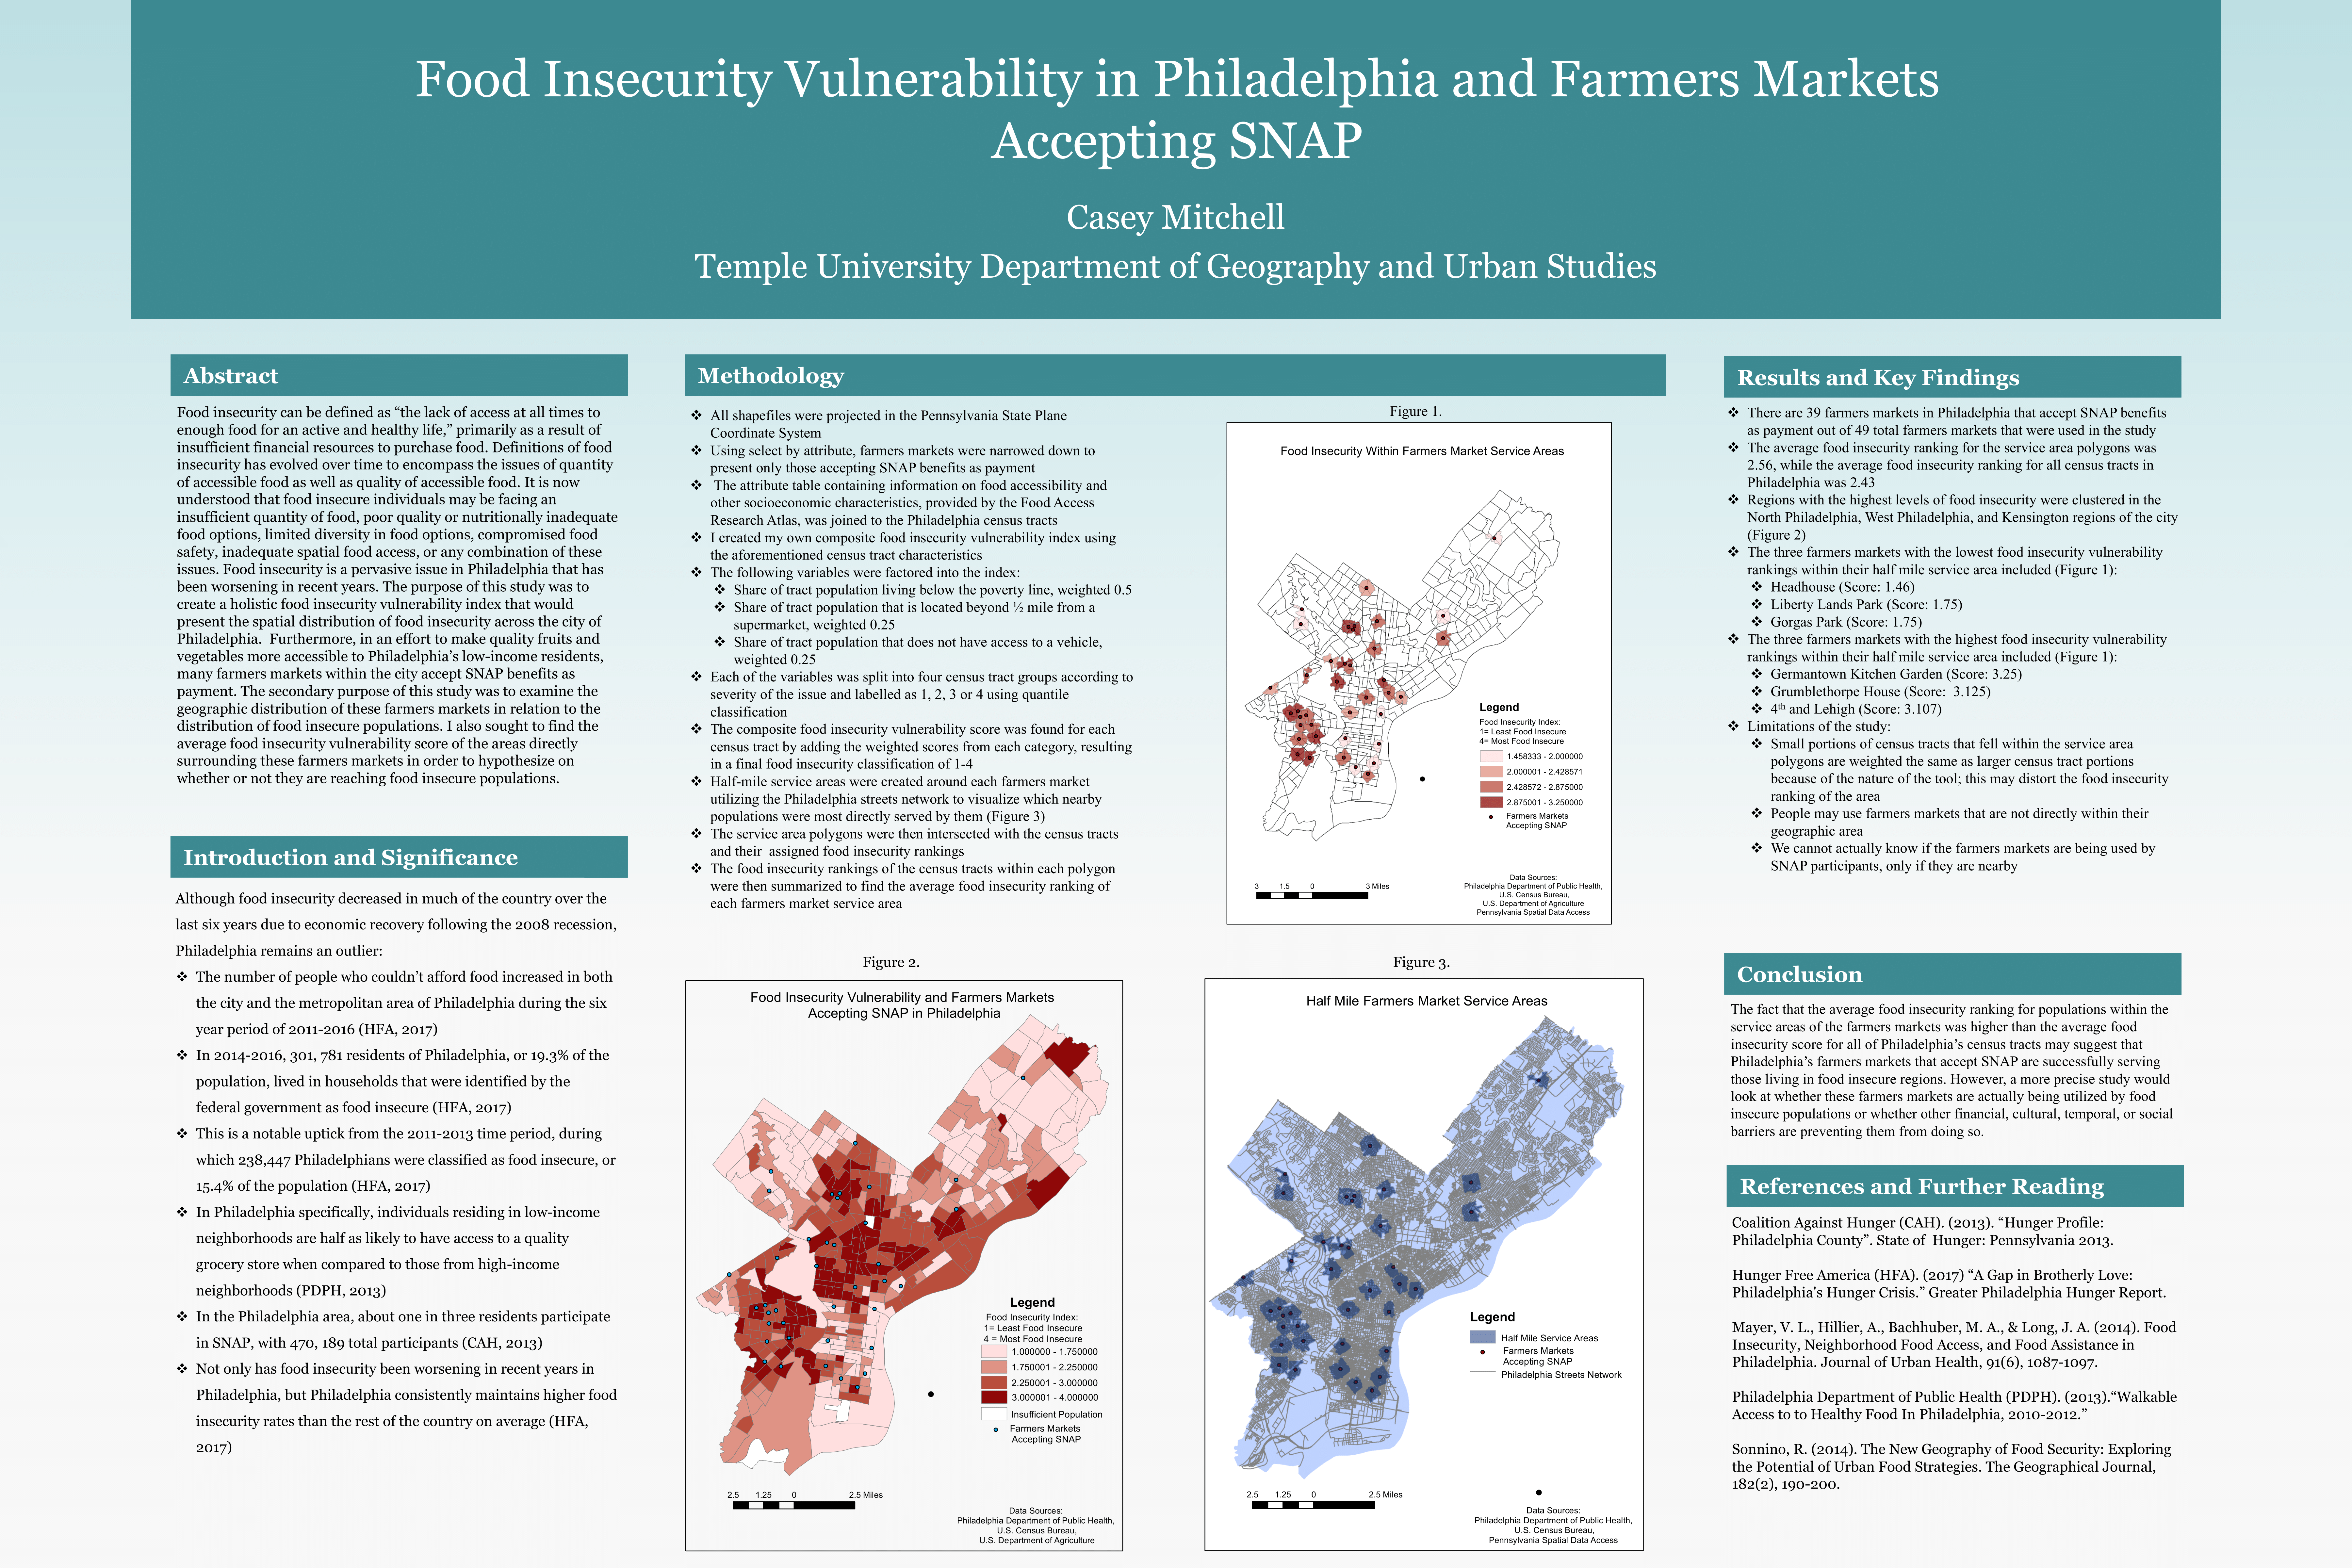 Food Insecurity Vulnerability in Philadelphia and Farmers Markets Accepting SNAP